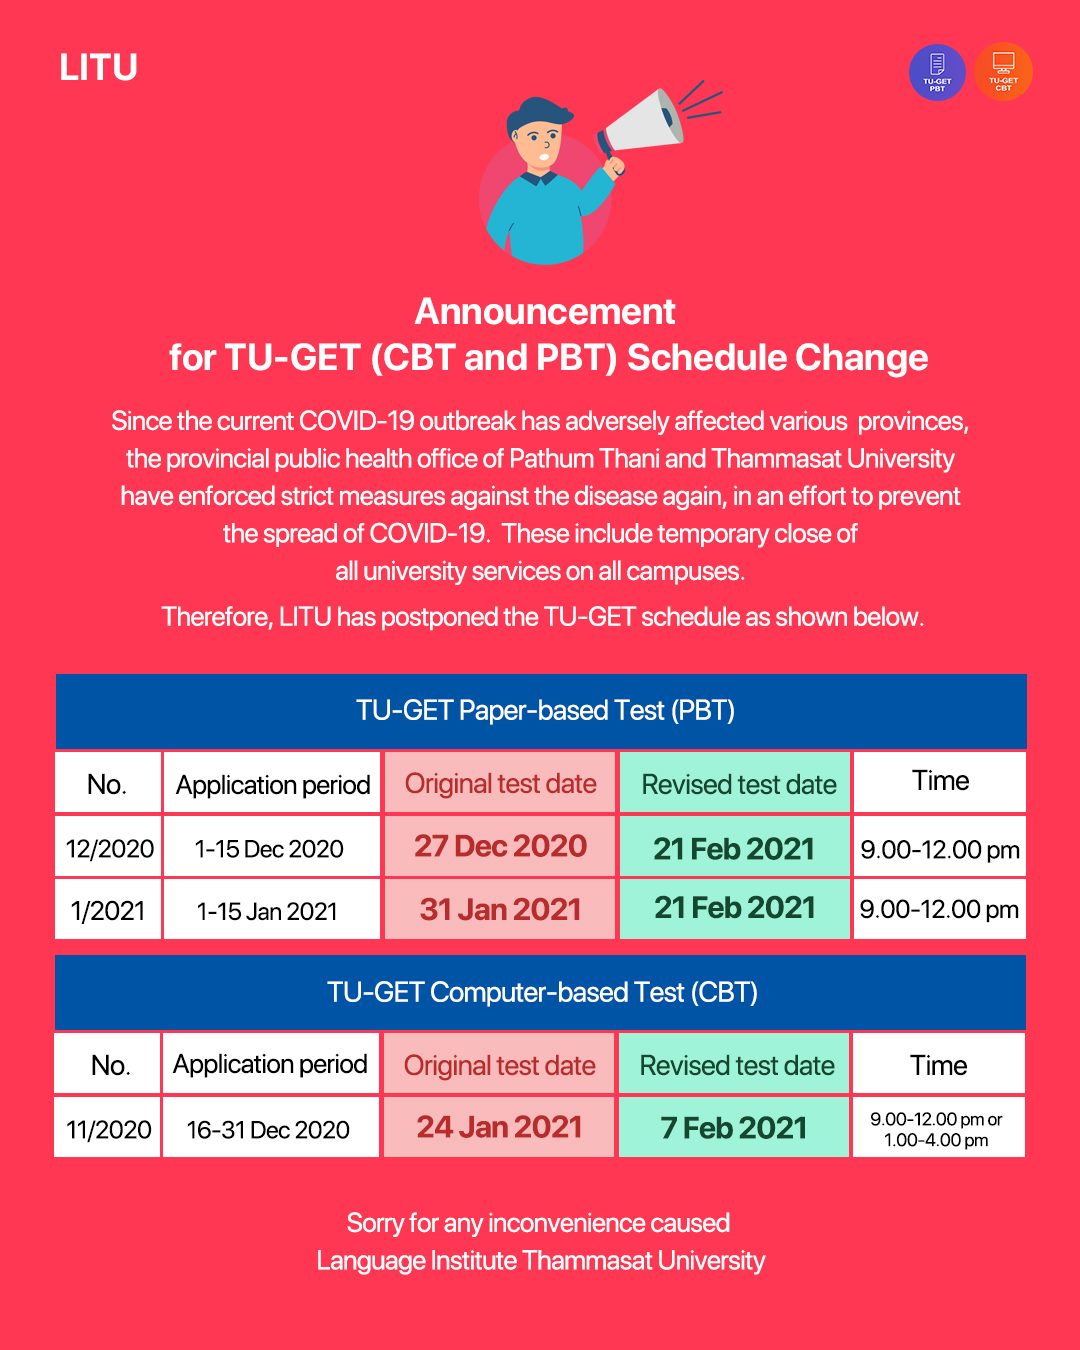 Announcement for TU-GET (CBT and PBT) Schedule Change